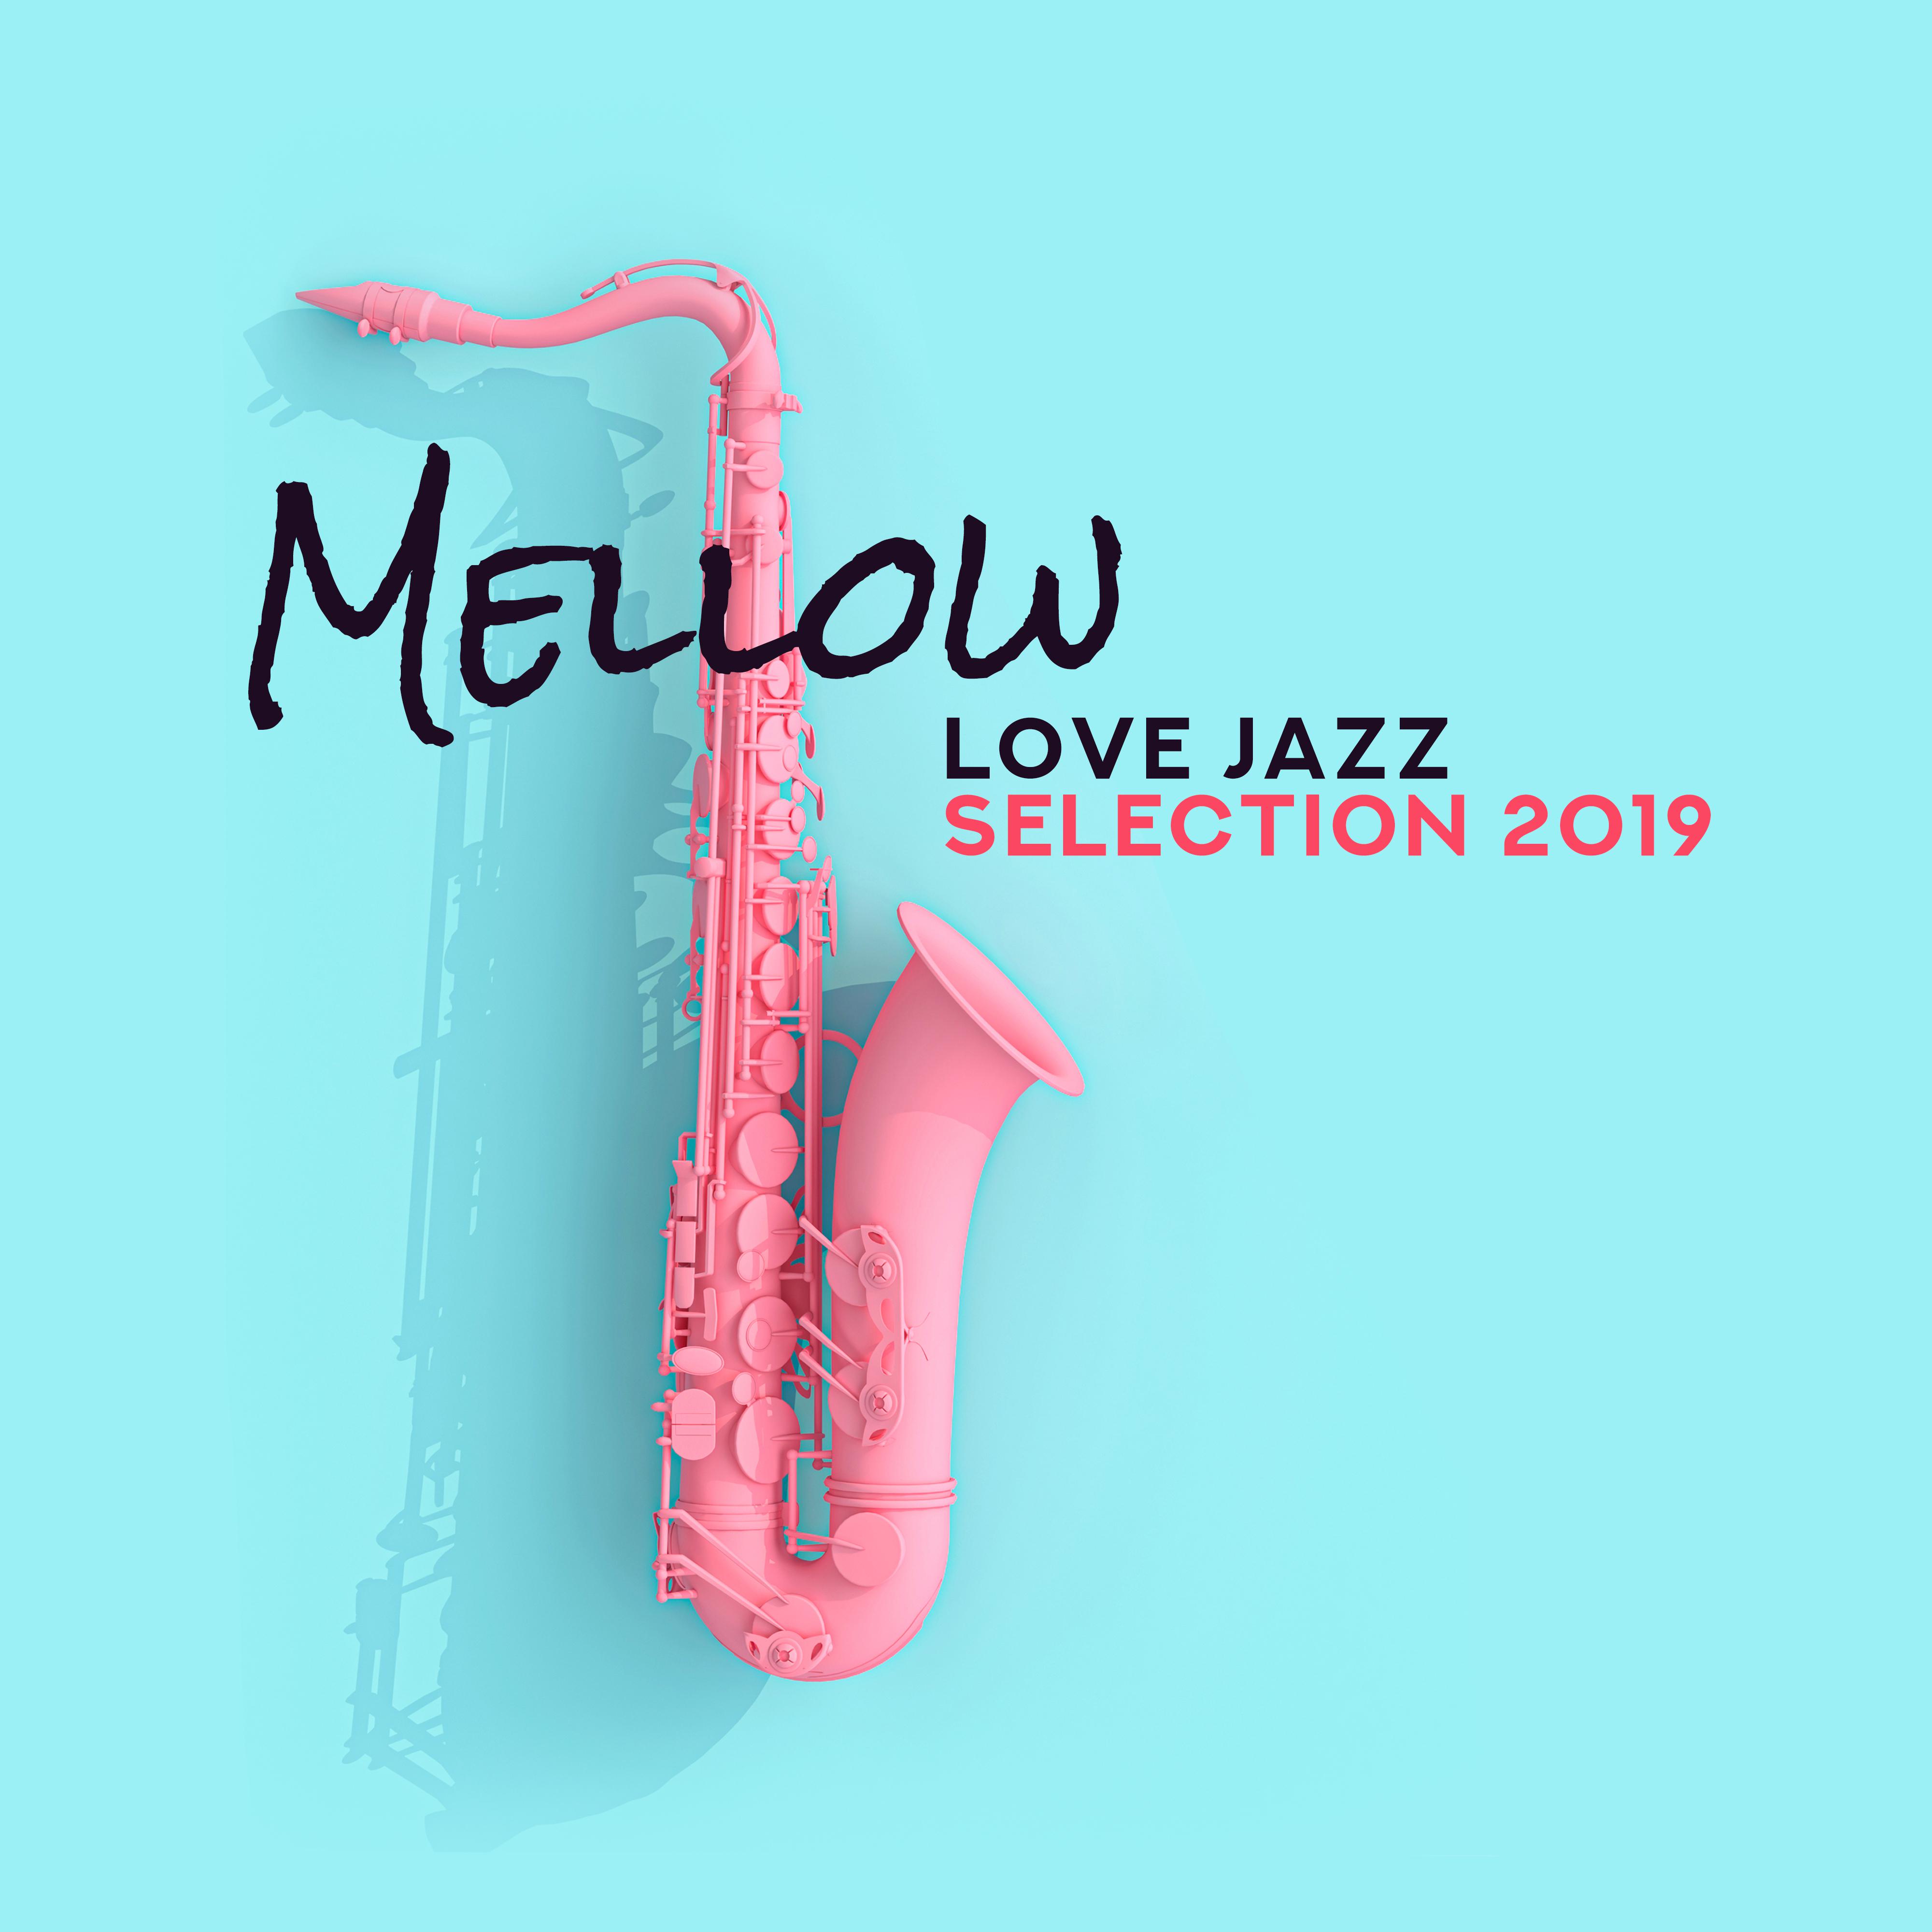 Mellow Love Jazz Selection 2019: Romantic Compilation of Smooth Jazz Music Created for Couple' s Evening Date in Elegant Restaurant  Intimate Moments at Home, Swing Vintage Piano Melodies